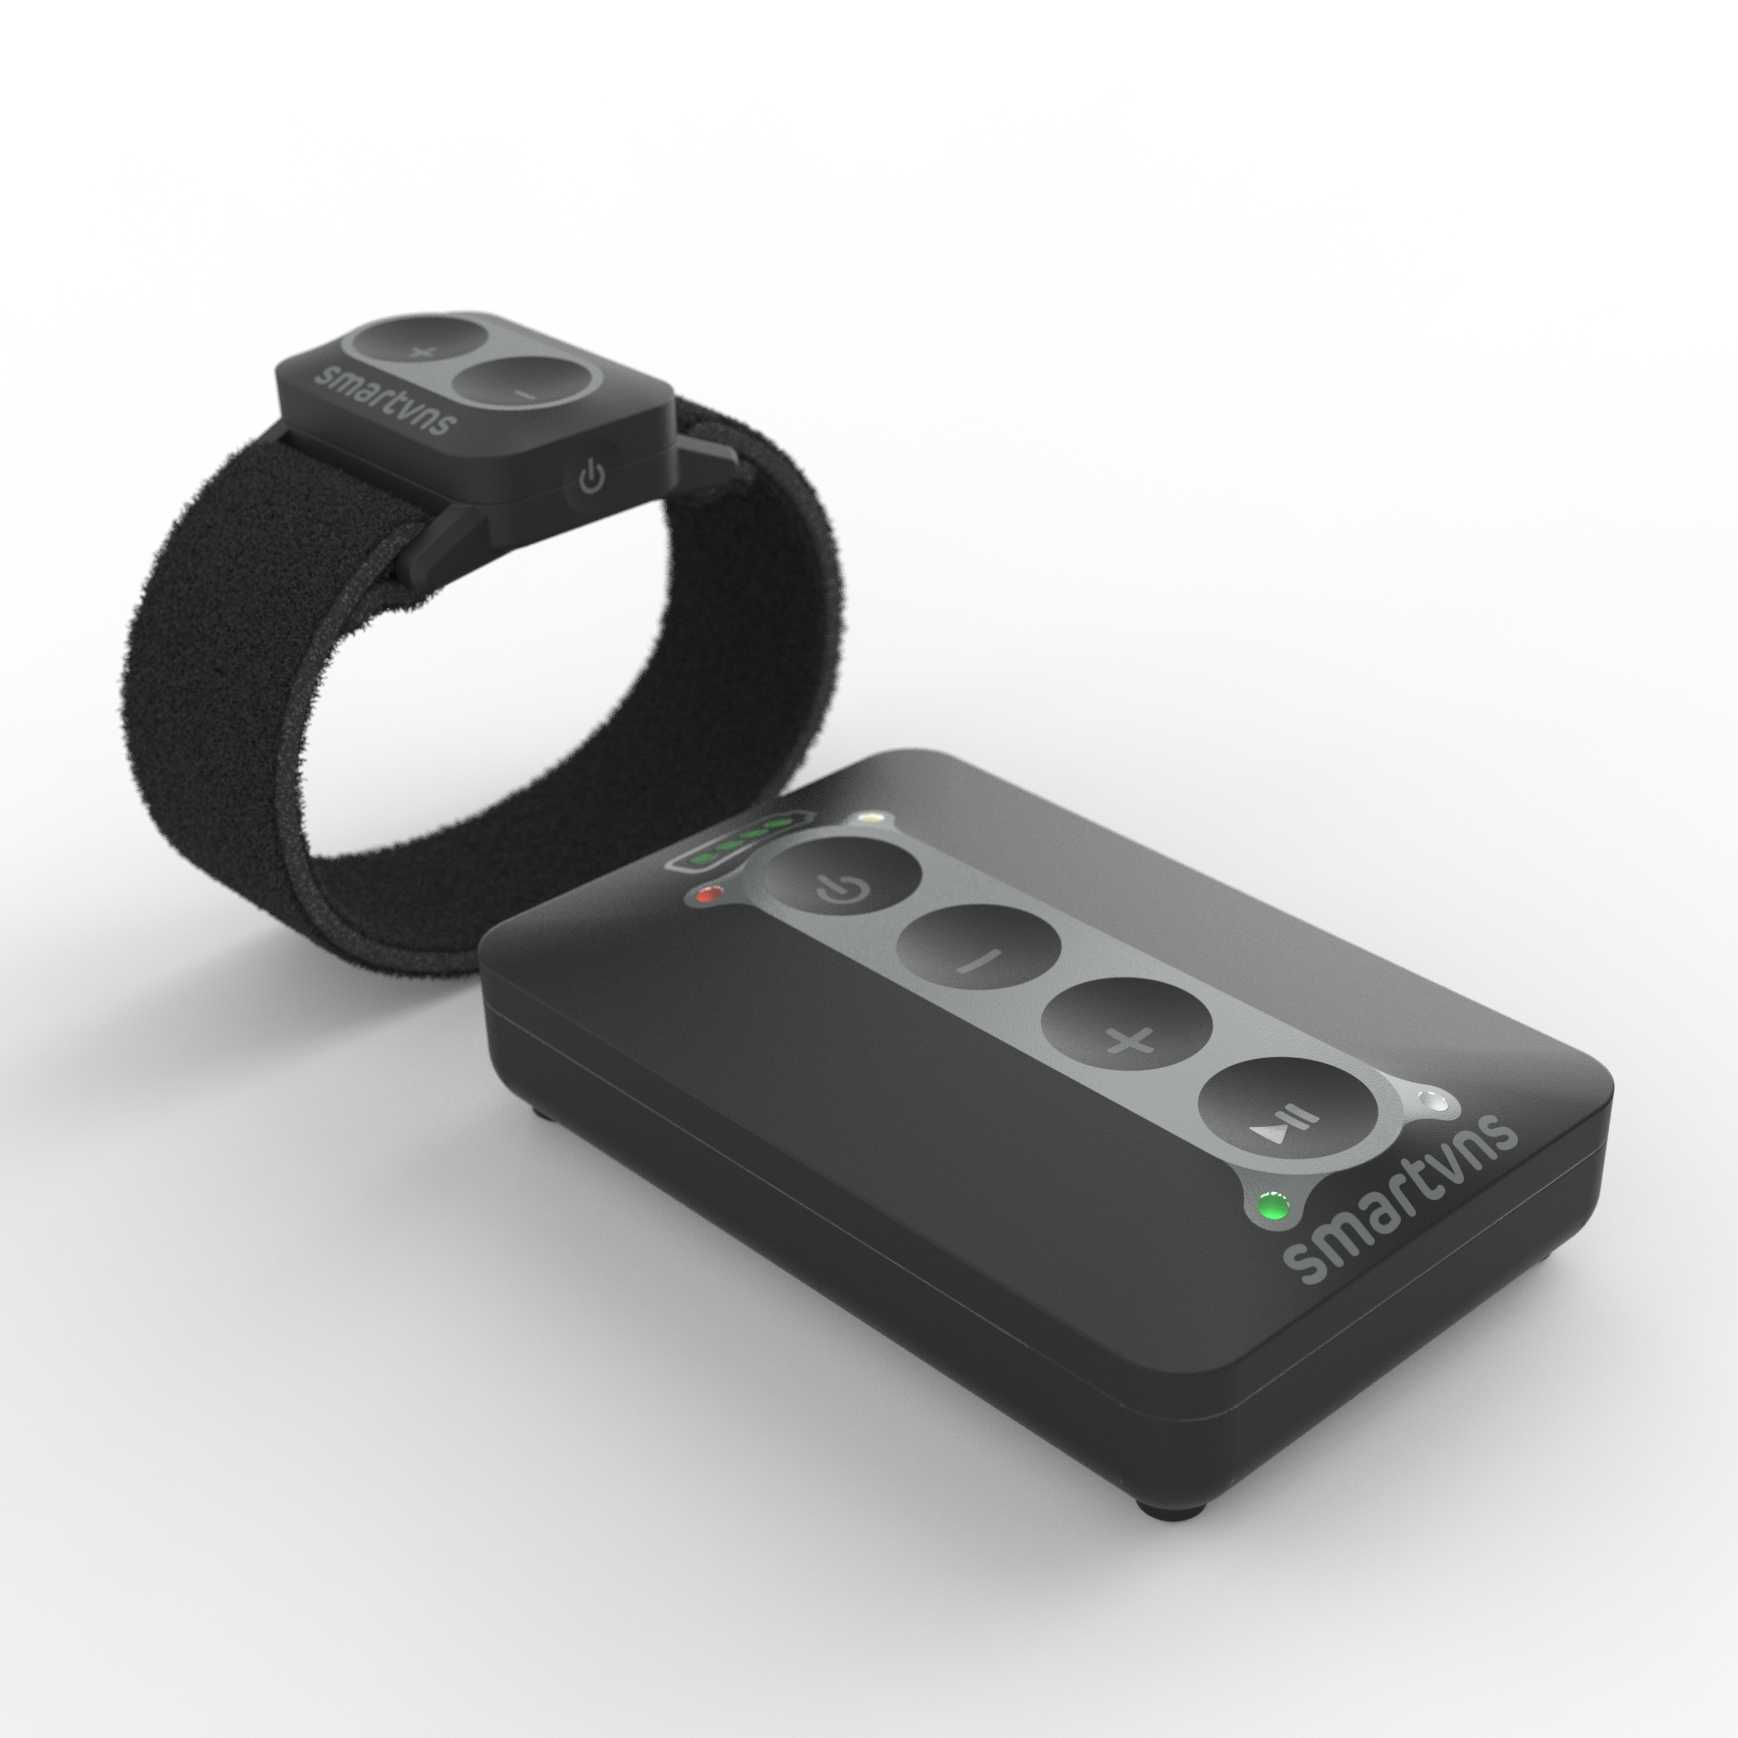 Enlarged view: 3D Rendering of the amart vns Device and smart vns Wristband